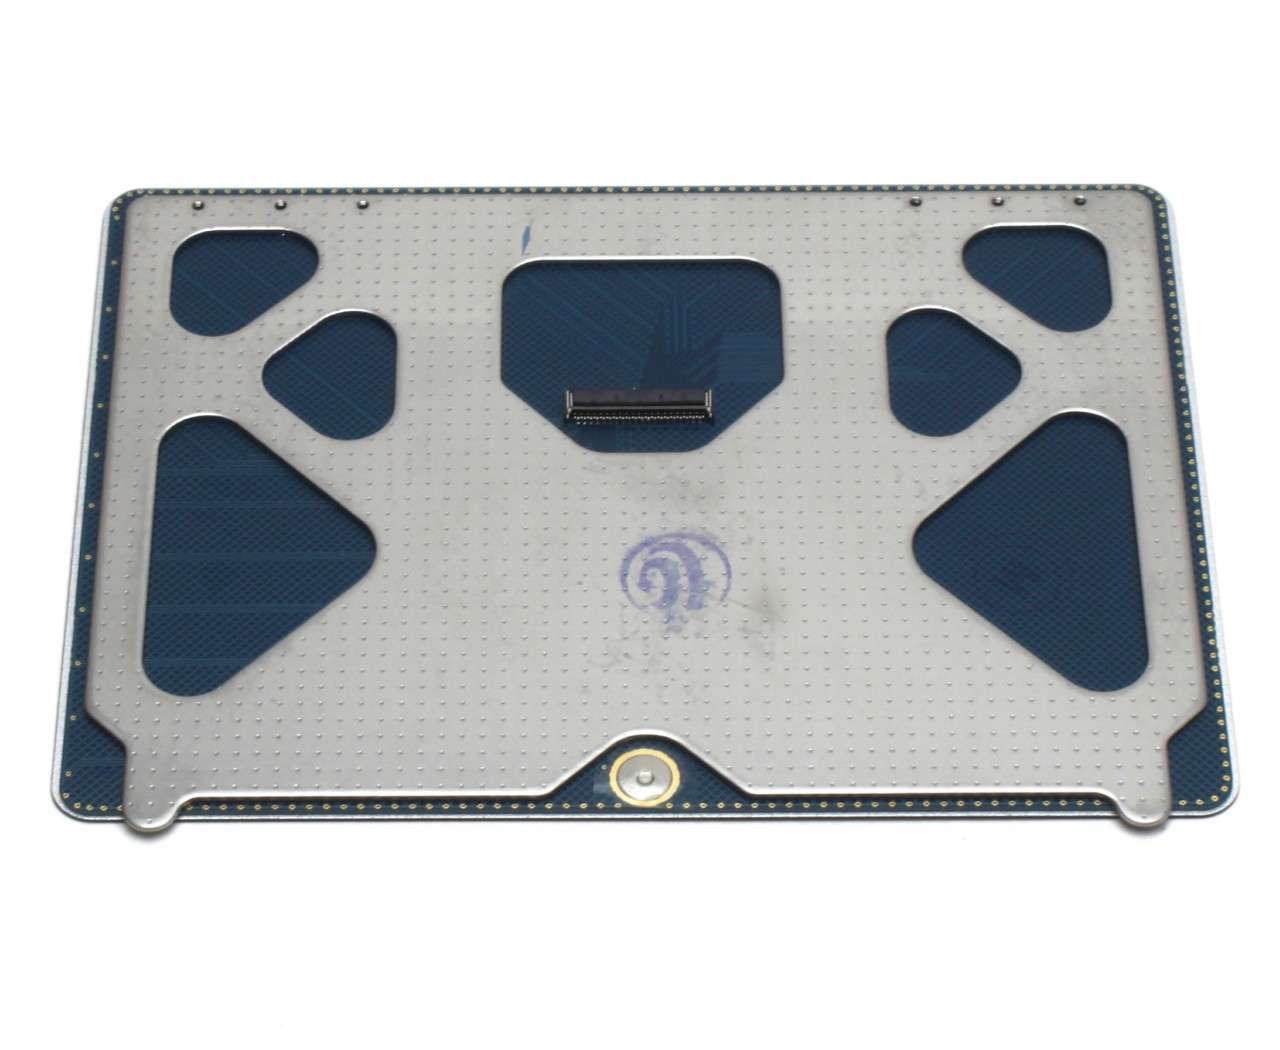 Touchpad Apple Macbook Pro 17 A1297 Early 2009 Trackpad image10